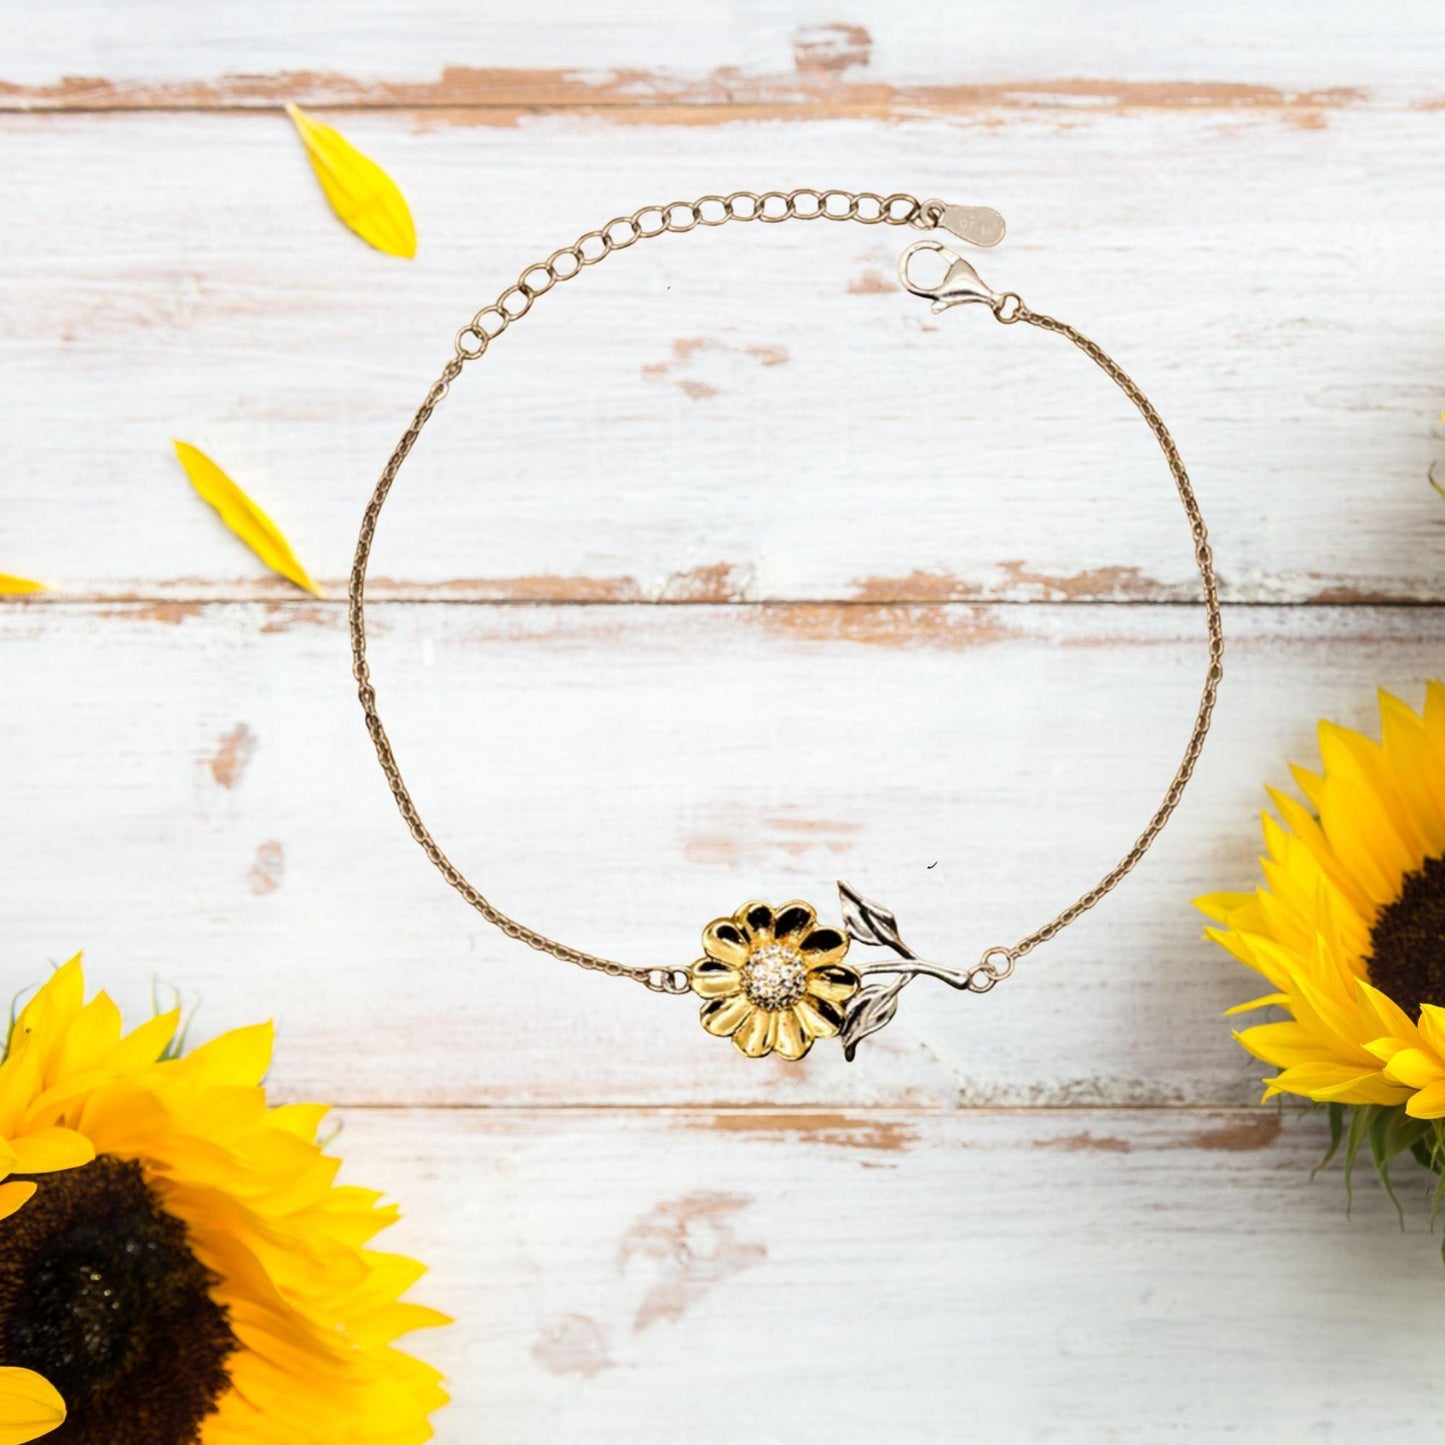 Remarkable Butcher Gifts, Your dedication and hard work, Inspirational Birthday Christmas Unique Sunflower Bracelet For Butcher, Coworkers, Men, Women, Friends - Mallard Moon Gift Shop